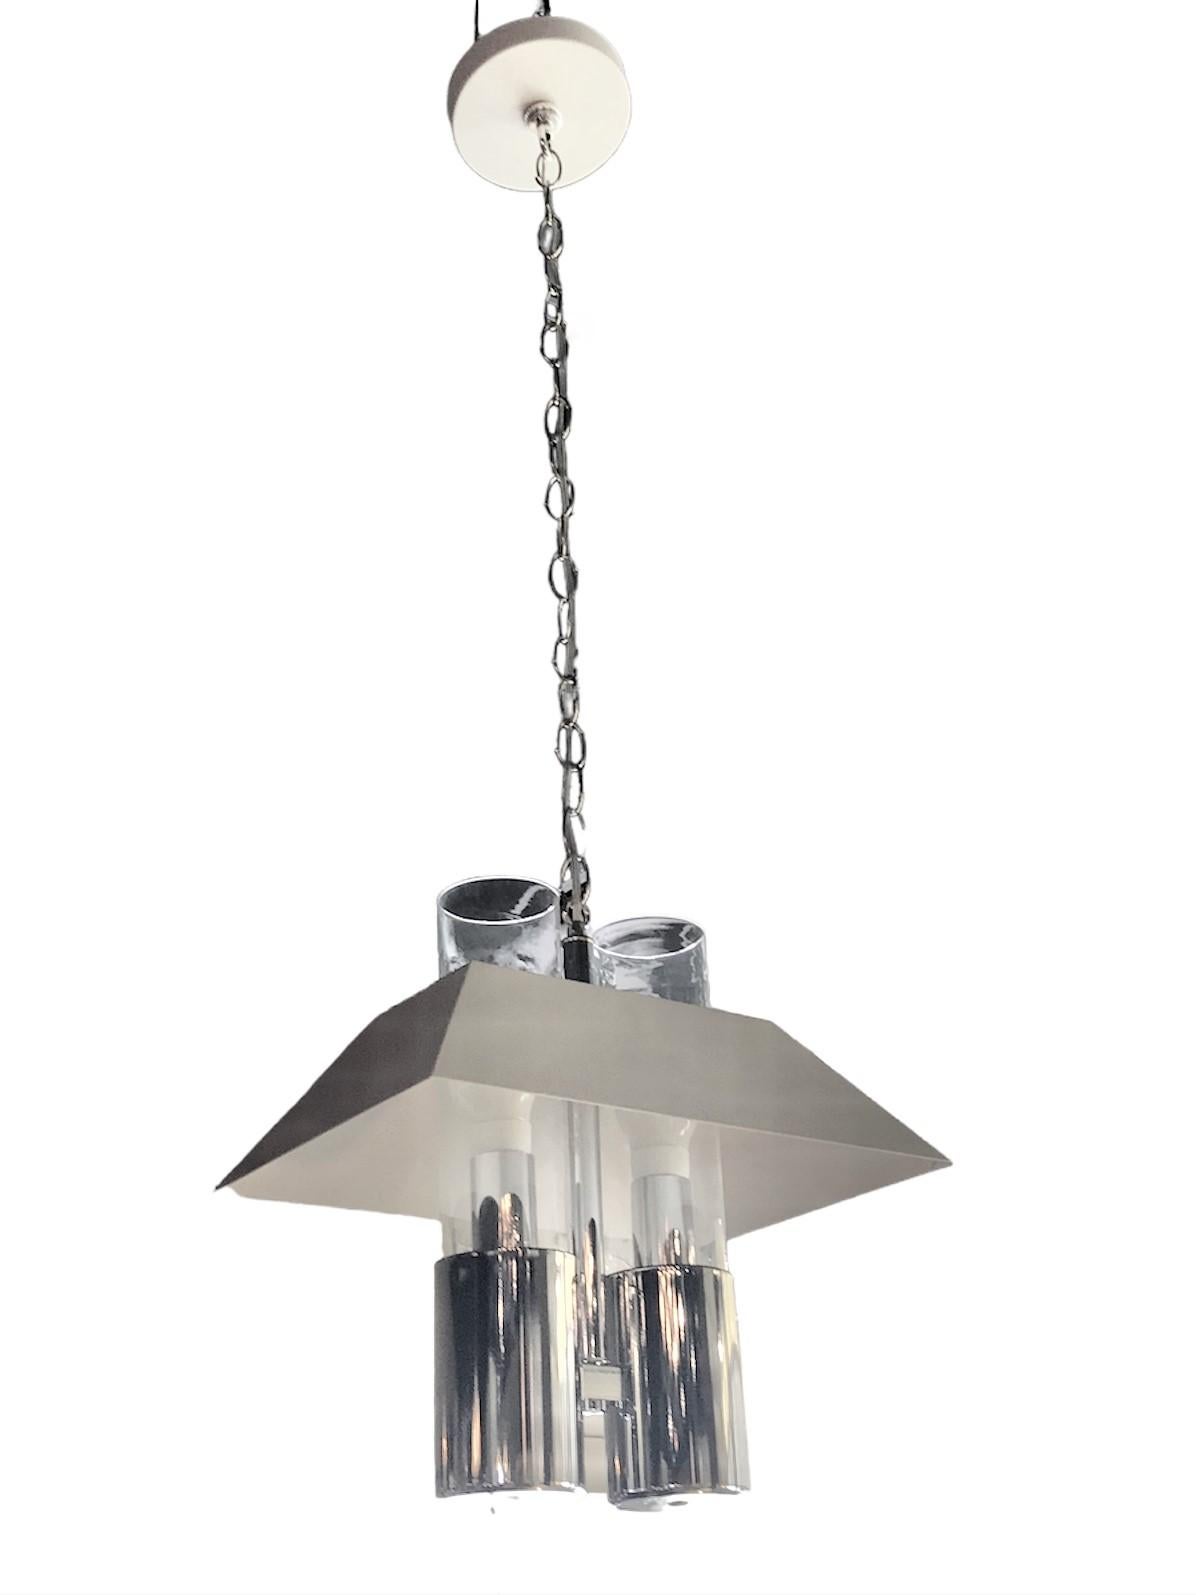 Attributed to Robert Sonneman, a fantastic pendant fixture in a Modern Bouillotte style. A chrome base supports two cylindrical glass shades that protude through a white metal shade. Having a solid metal shade, the light diffuses down and shines up